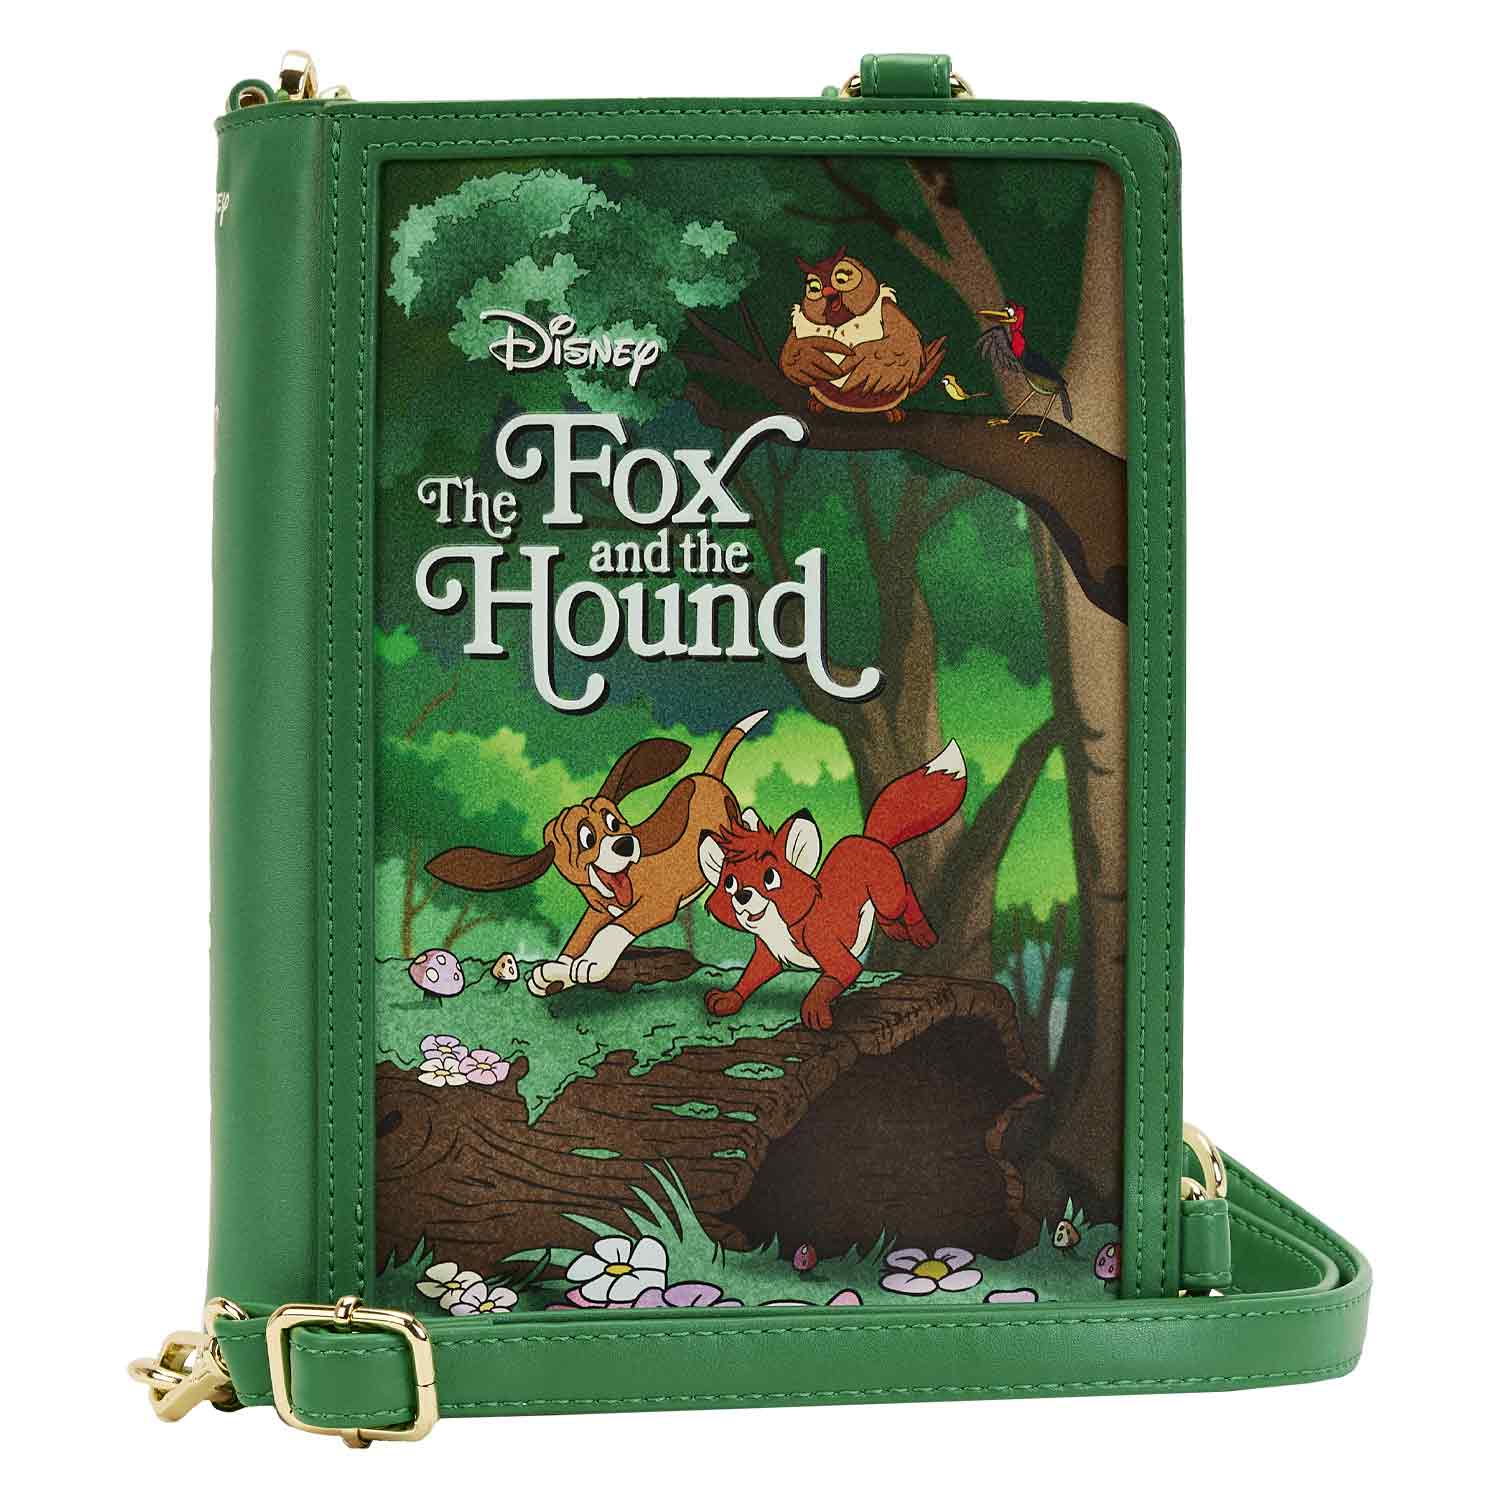 Loungefly x Disney Book Series The Fox and The Hound Convertible Crossbody Bag - GeekCore